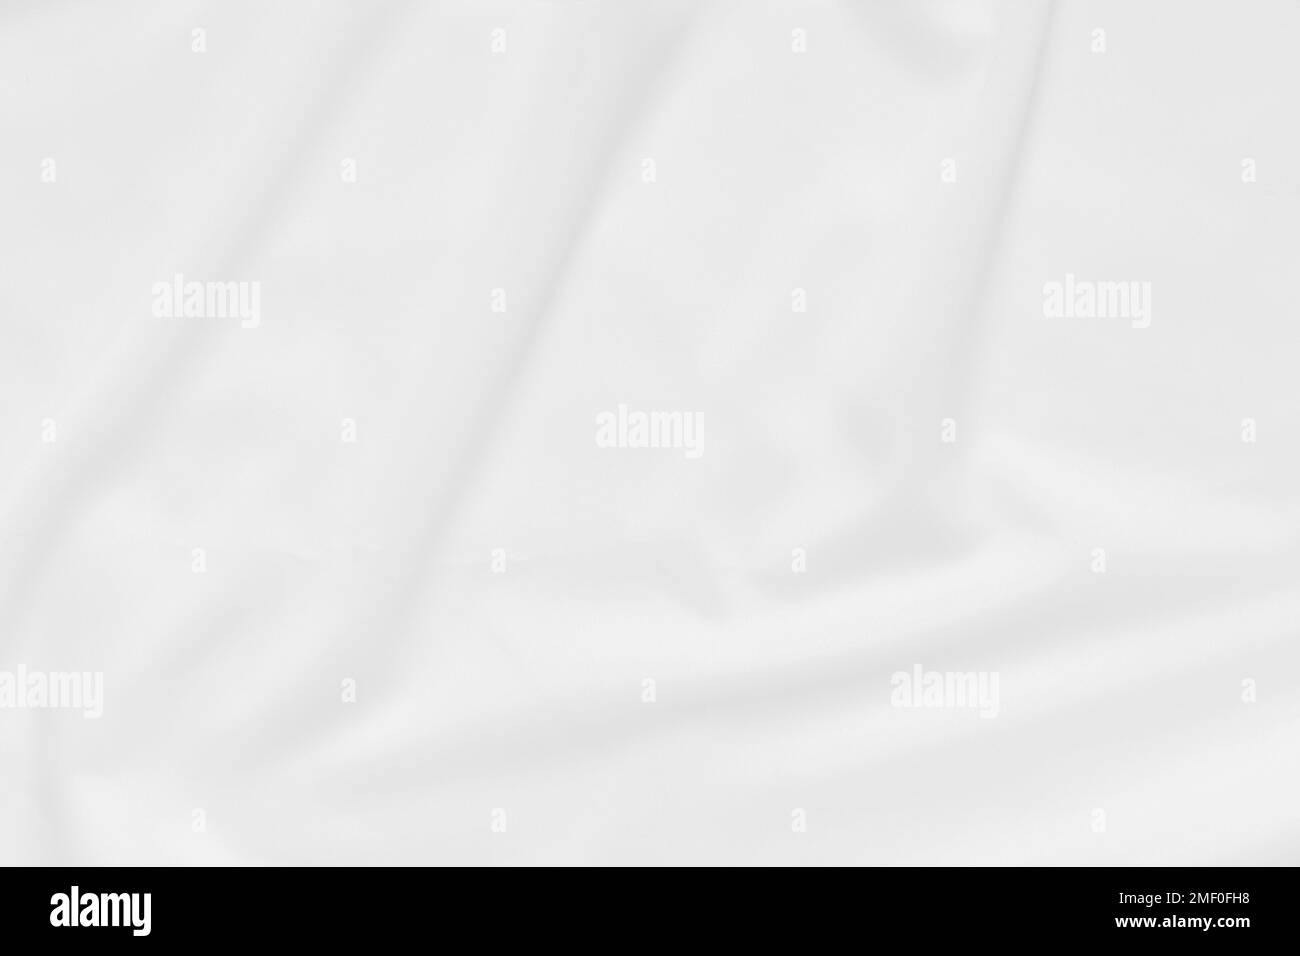 White Fabric Texture And Background Stock Photo Alamy